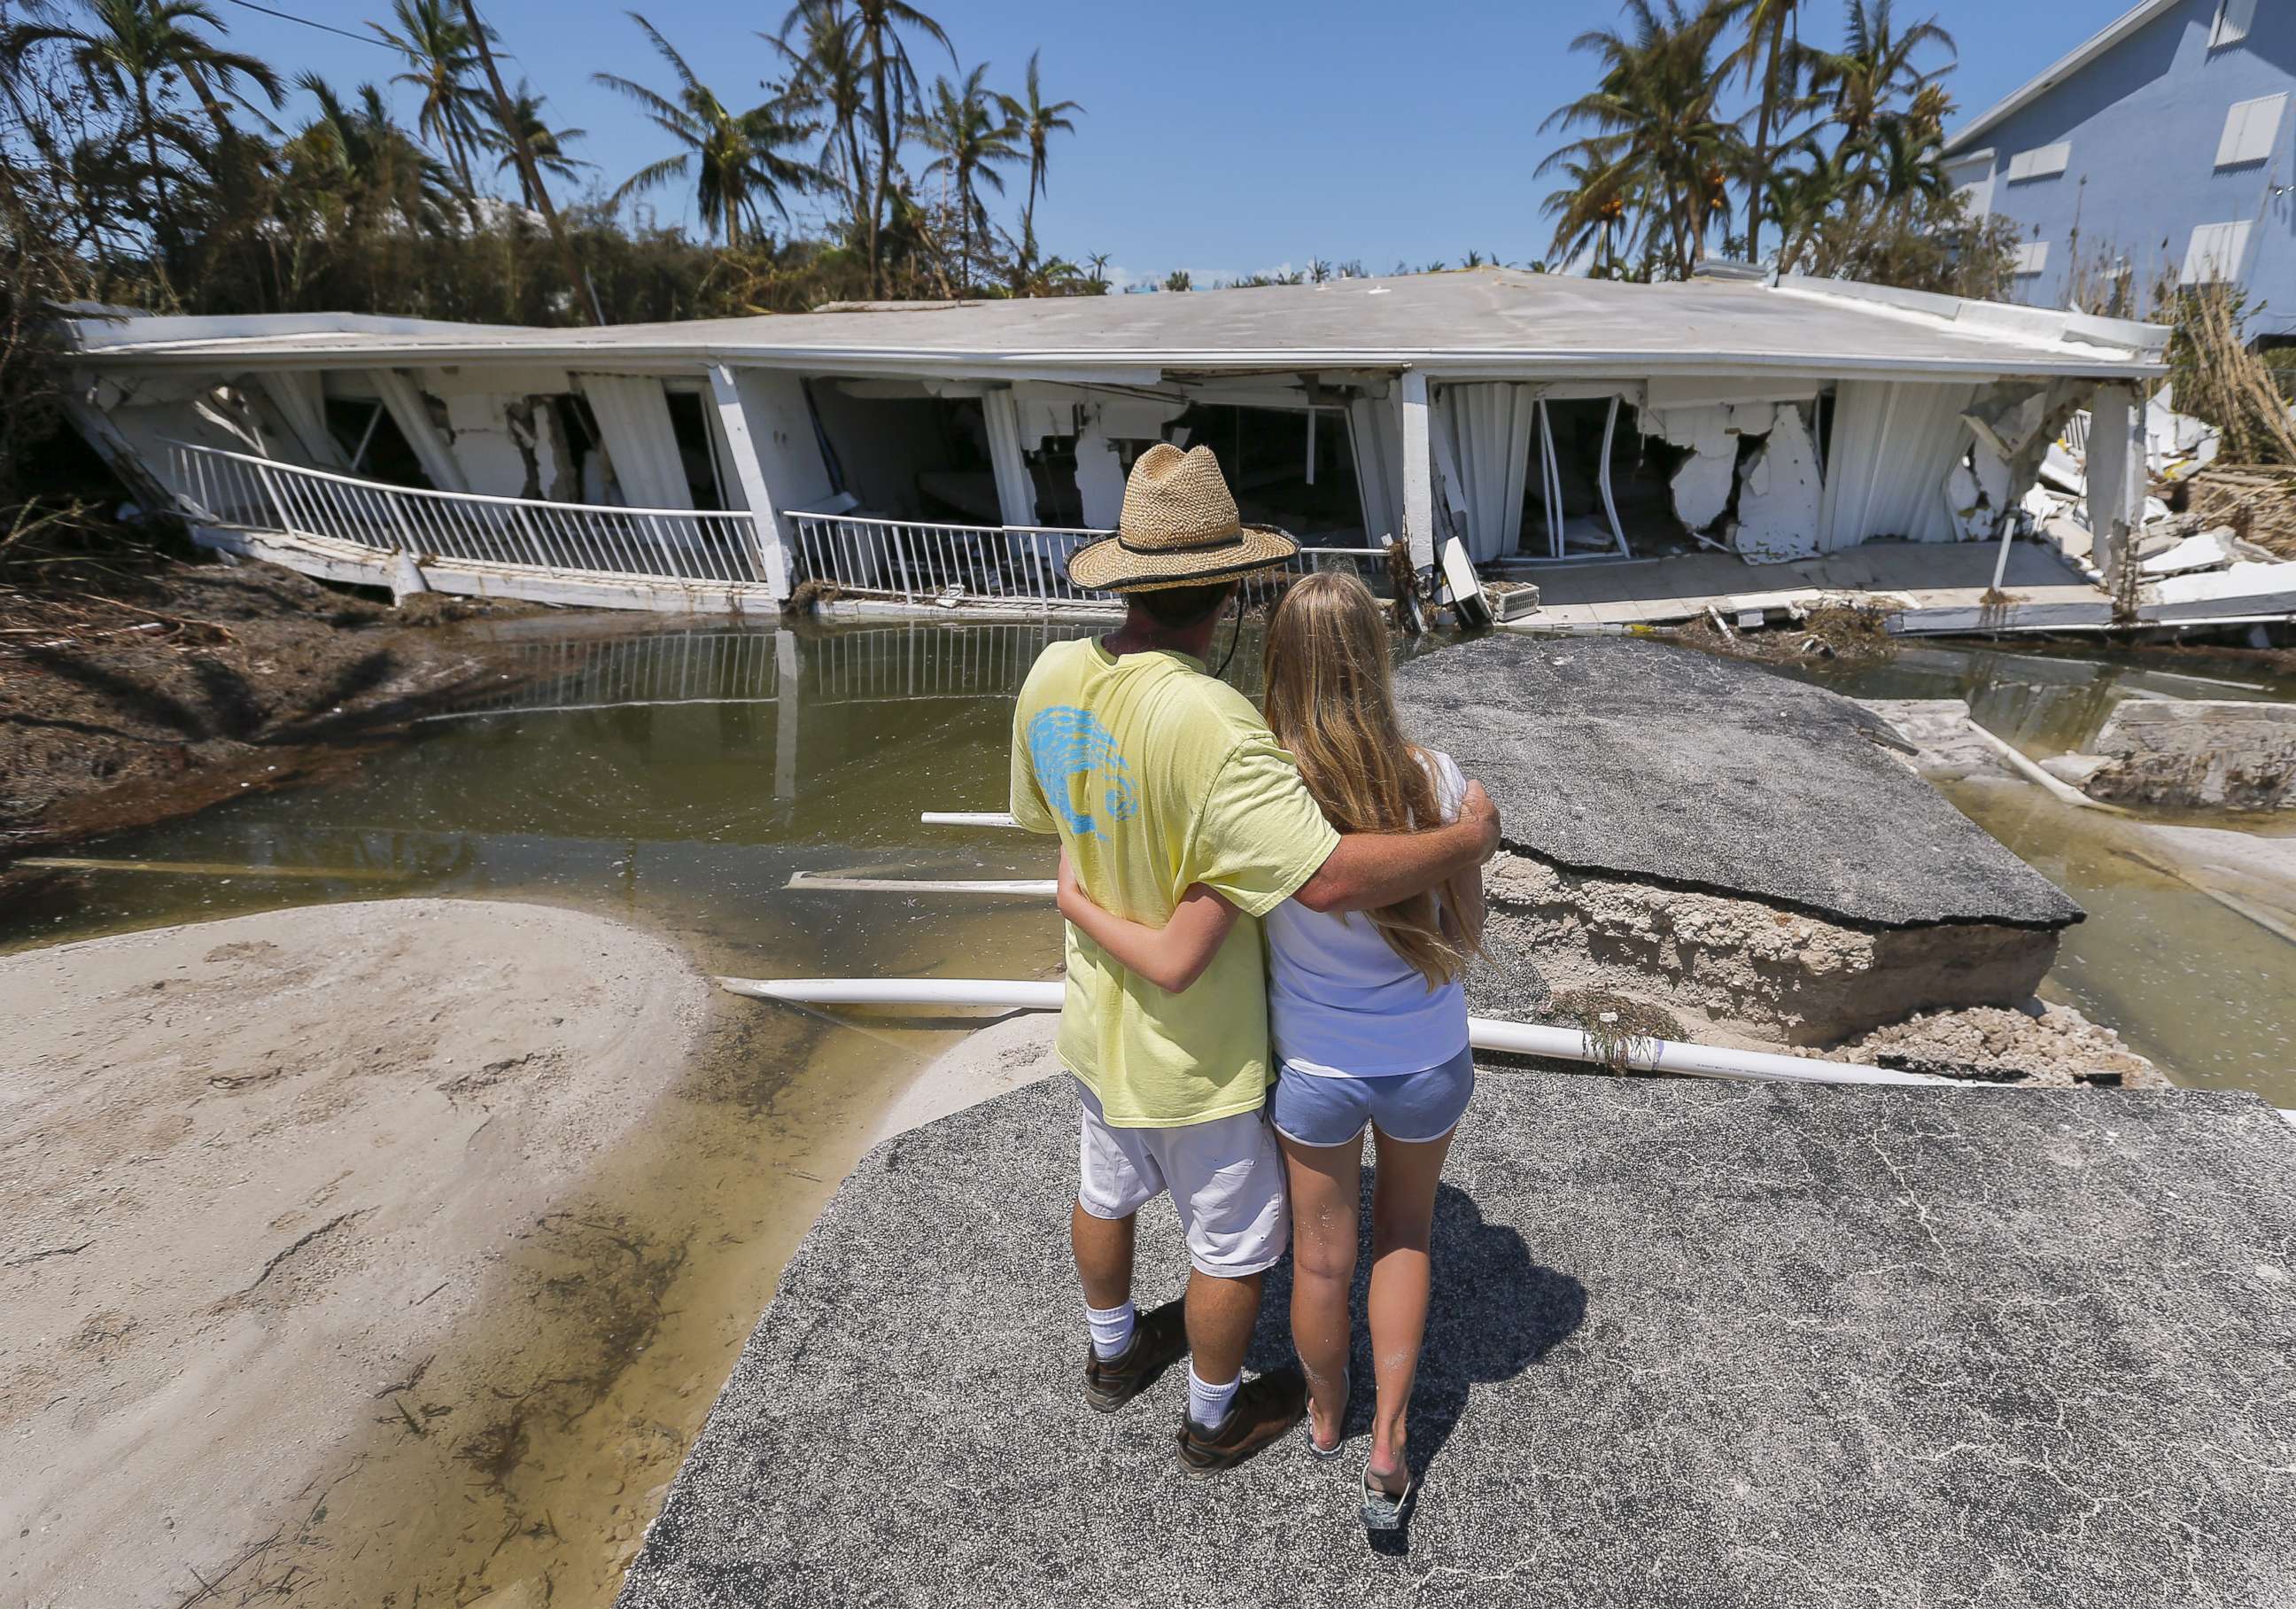 PHOTO: Mike Gilbert hugs his daughter Brooke while looking at a destroyed three-story condominium building after Hurricane Irma struck the Florida Keys in Islamorada, Fla., Sept. 12, 2017. The Gilbert family owns a unit in the building.